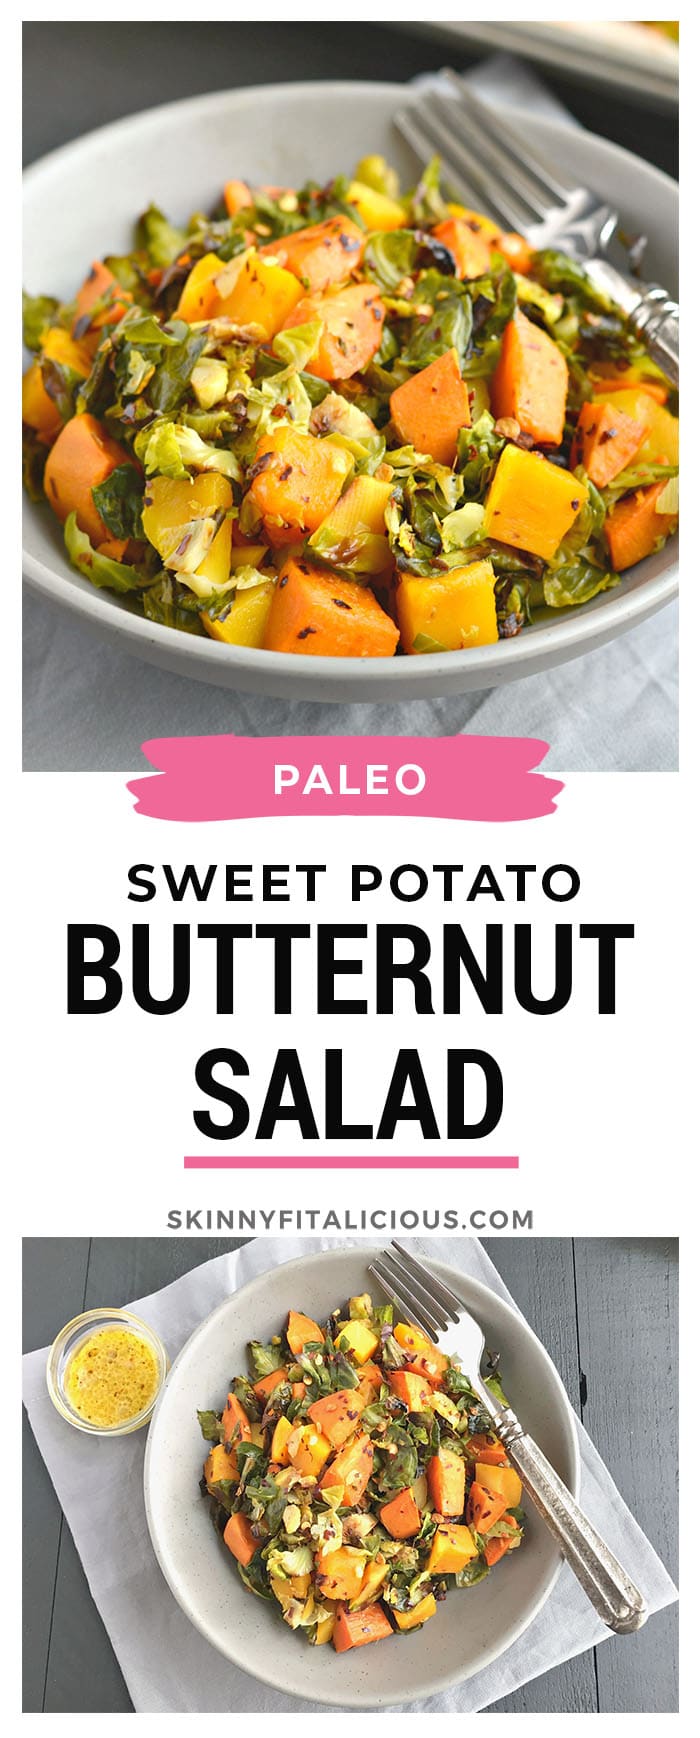 Brussels Sprouts Sweet Potato Salad is a warm and hearty salad. Made with roasted butternut squash, sweet potatoes and shredded brussels sprouts this salad is packed with nutrition and sweet and savory flavors! Gluten Free + Low Calorie + Paleo + Vegan